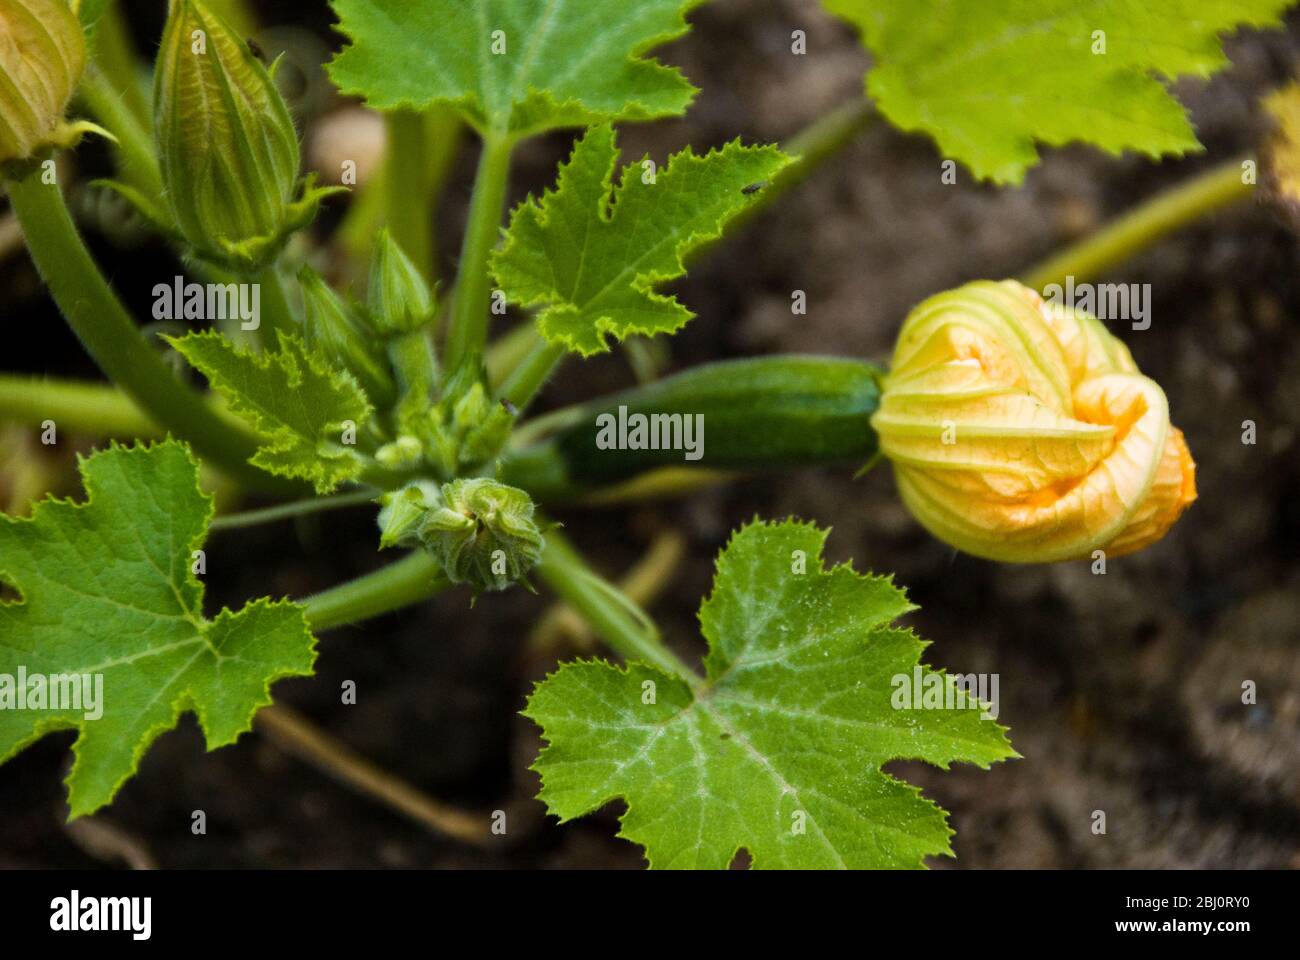 Courgette plants growing in good black earth showing opening furled flowers. - Stock Photo